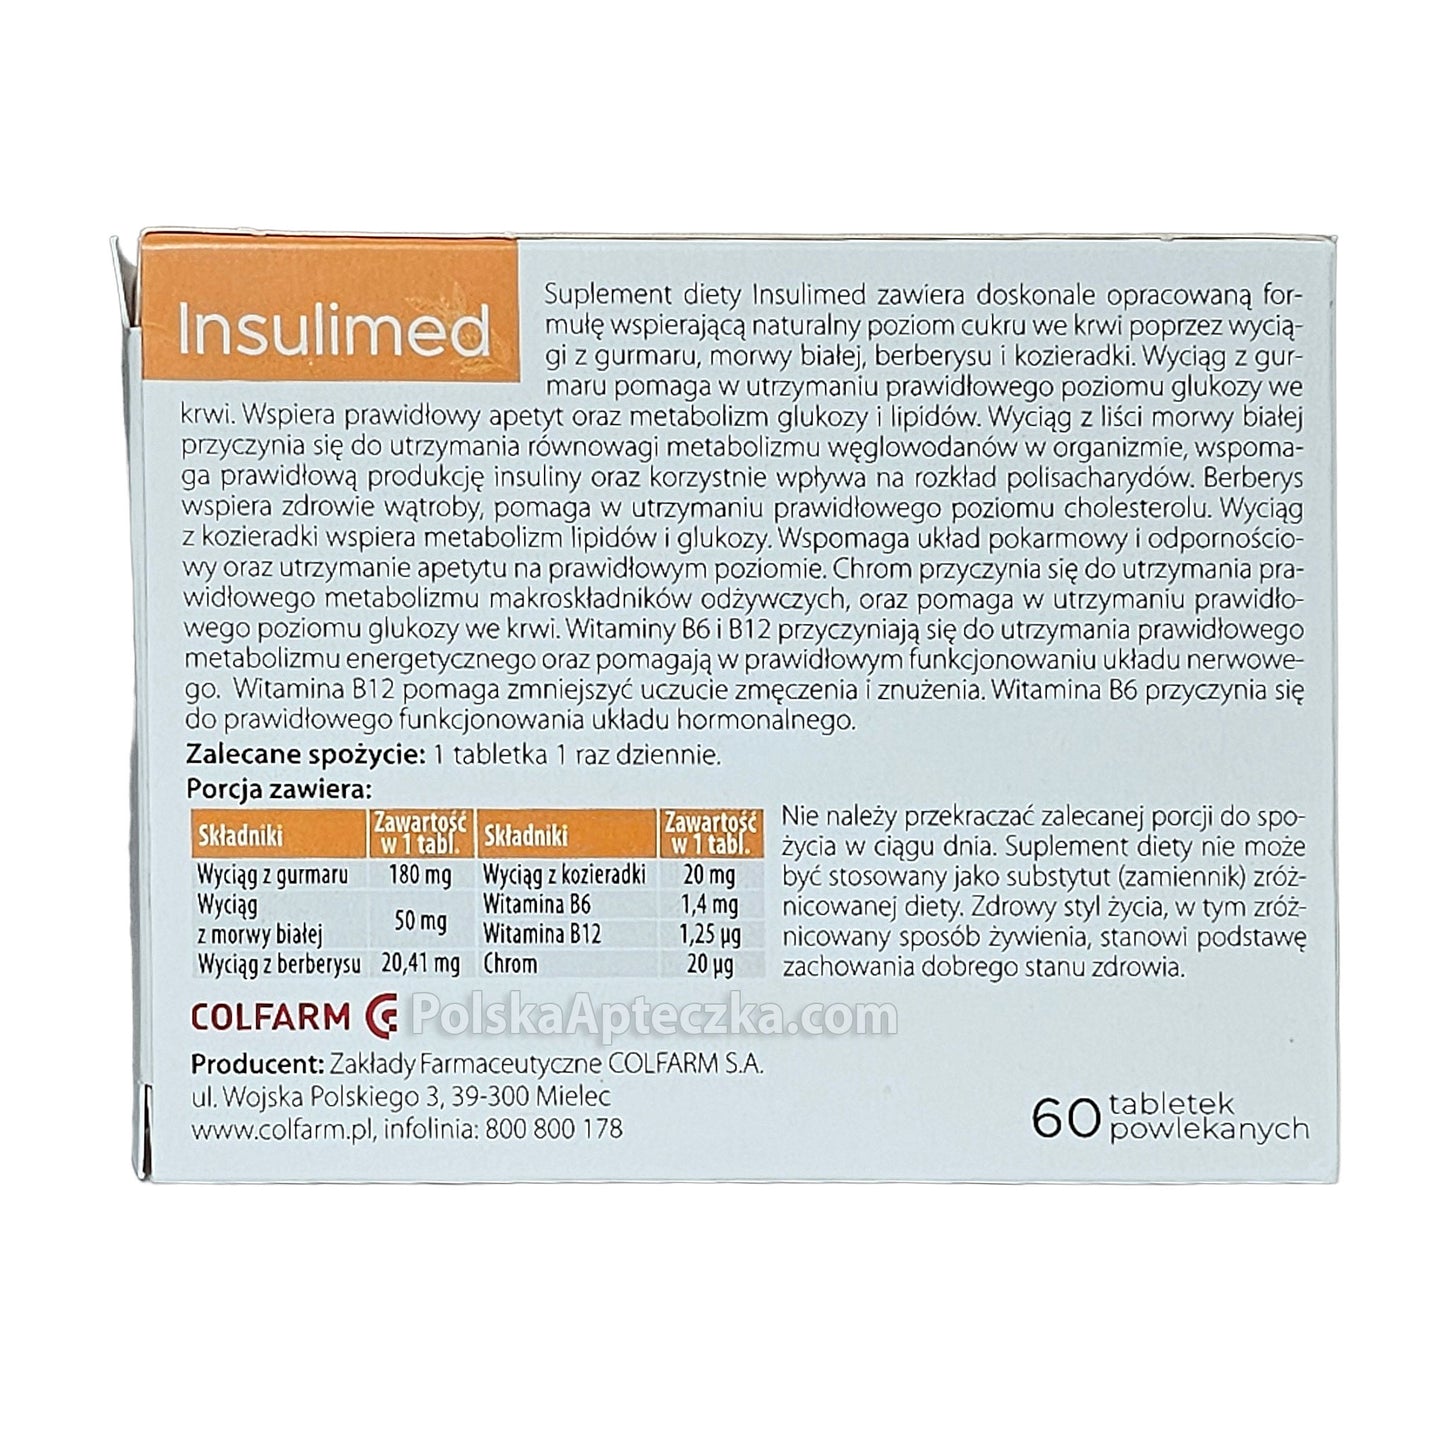 insulimed tablets